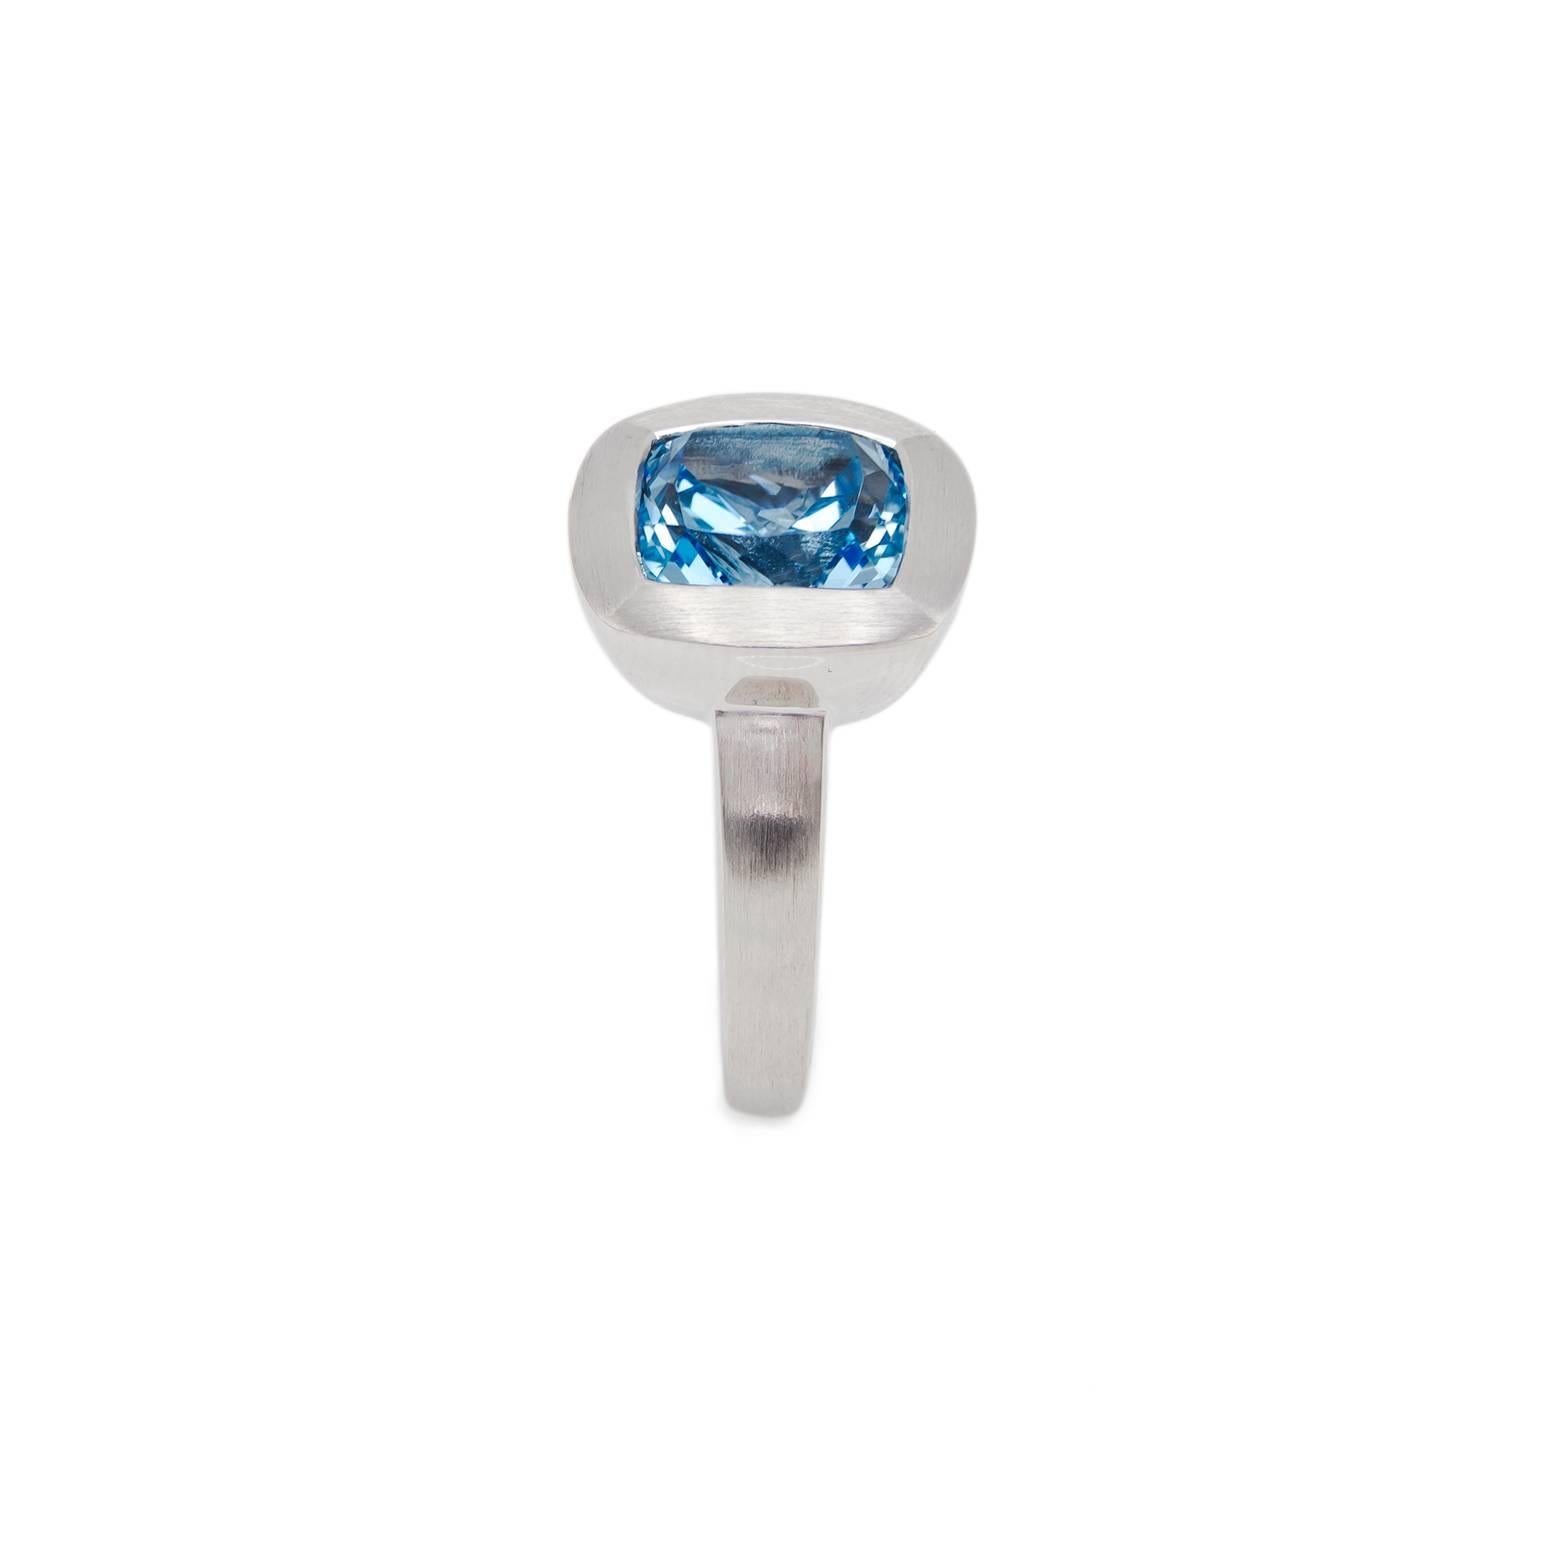 Modern Large Square Blue Topaz Ring set in Sterling Silver with a Matte Finish